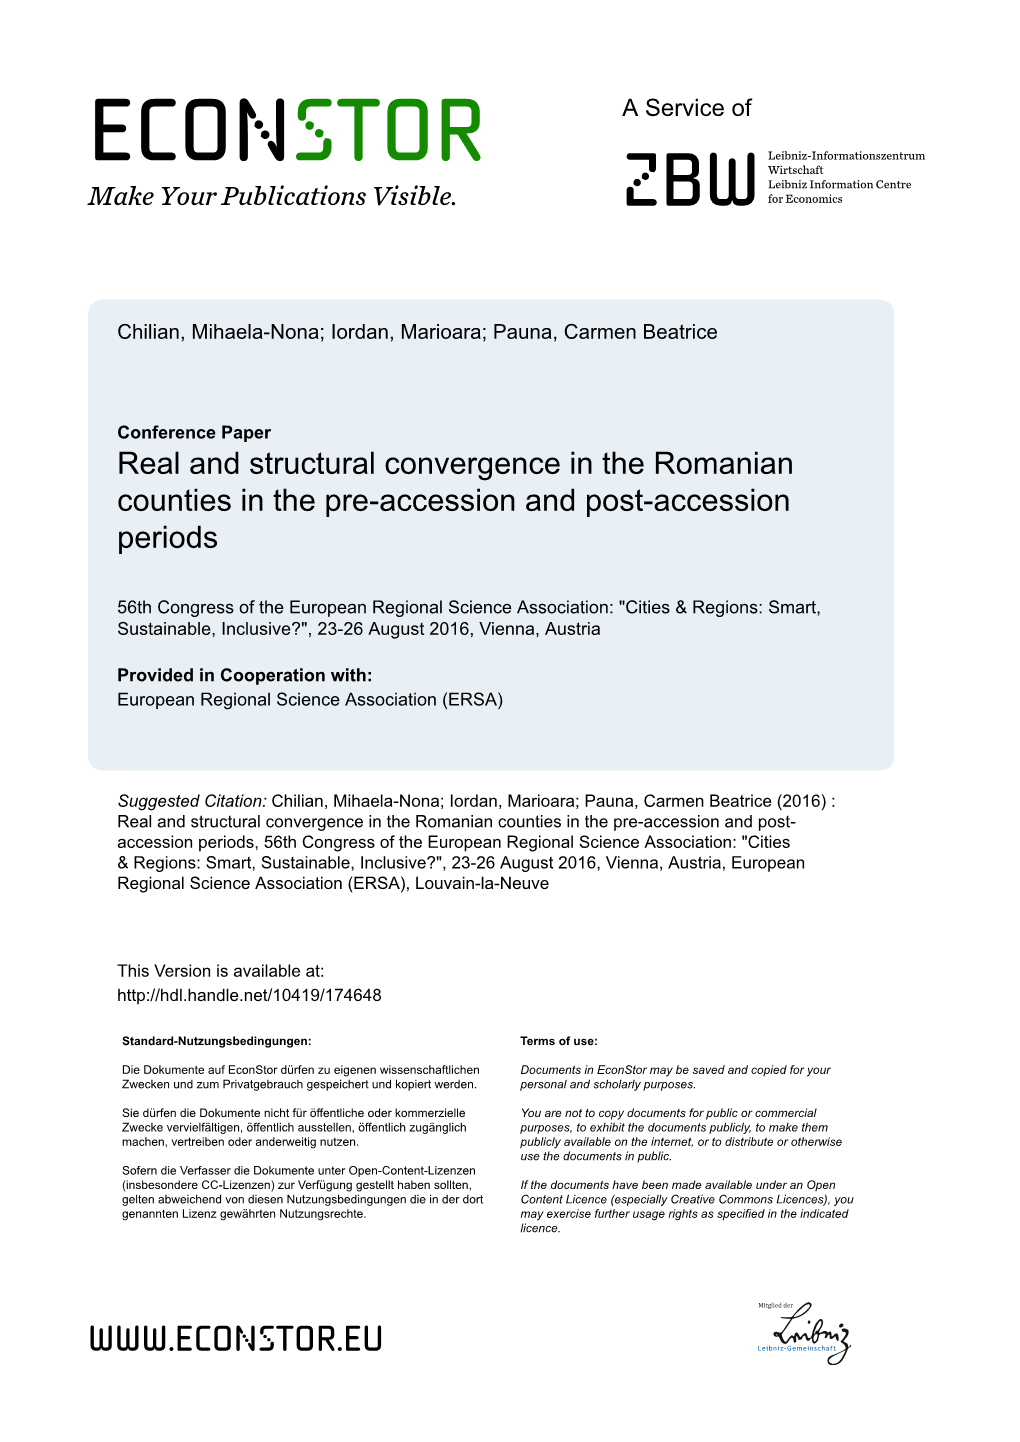 Real and Structural Convergence in the Romanian Counties in the Pre-Accession and Post-Accession Periods